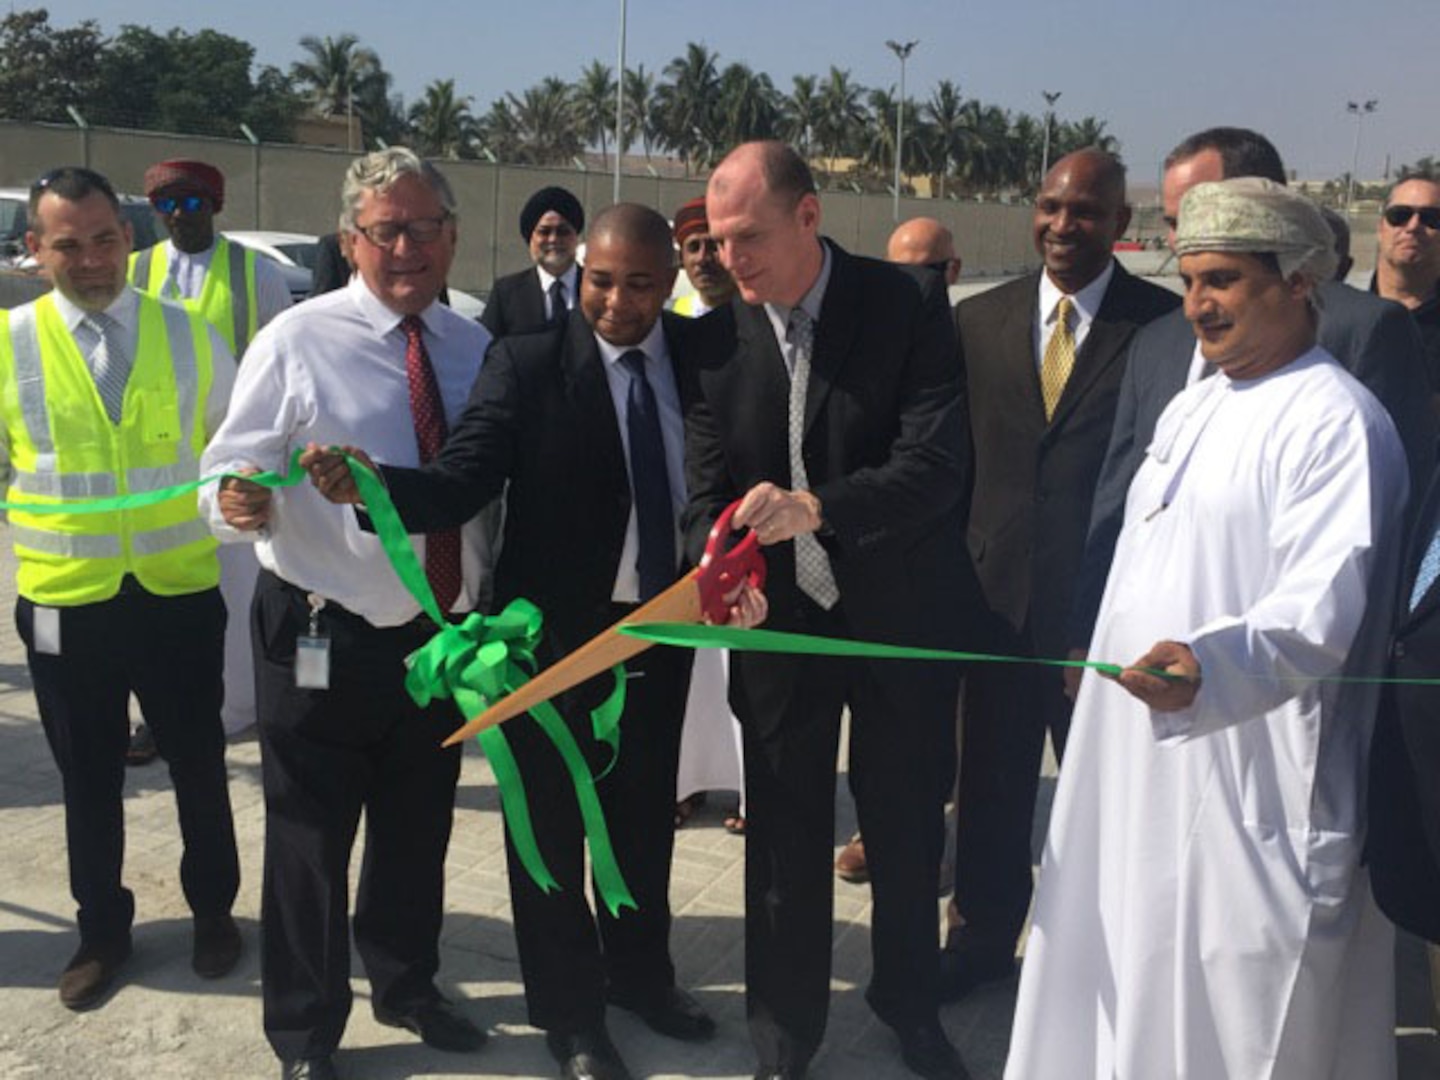 DLA Energy Commander Air Force Brig. Gen. Martin Chapin cuts the ribbon to officially open DLA Distribution's new material processing center in Salalah, Oman Feb. 9. 